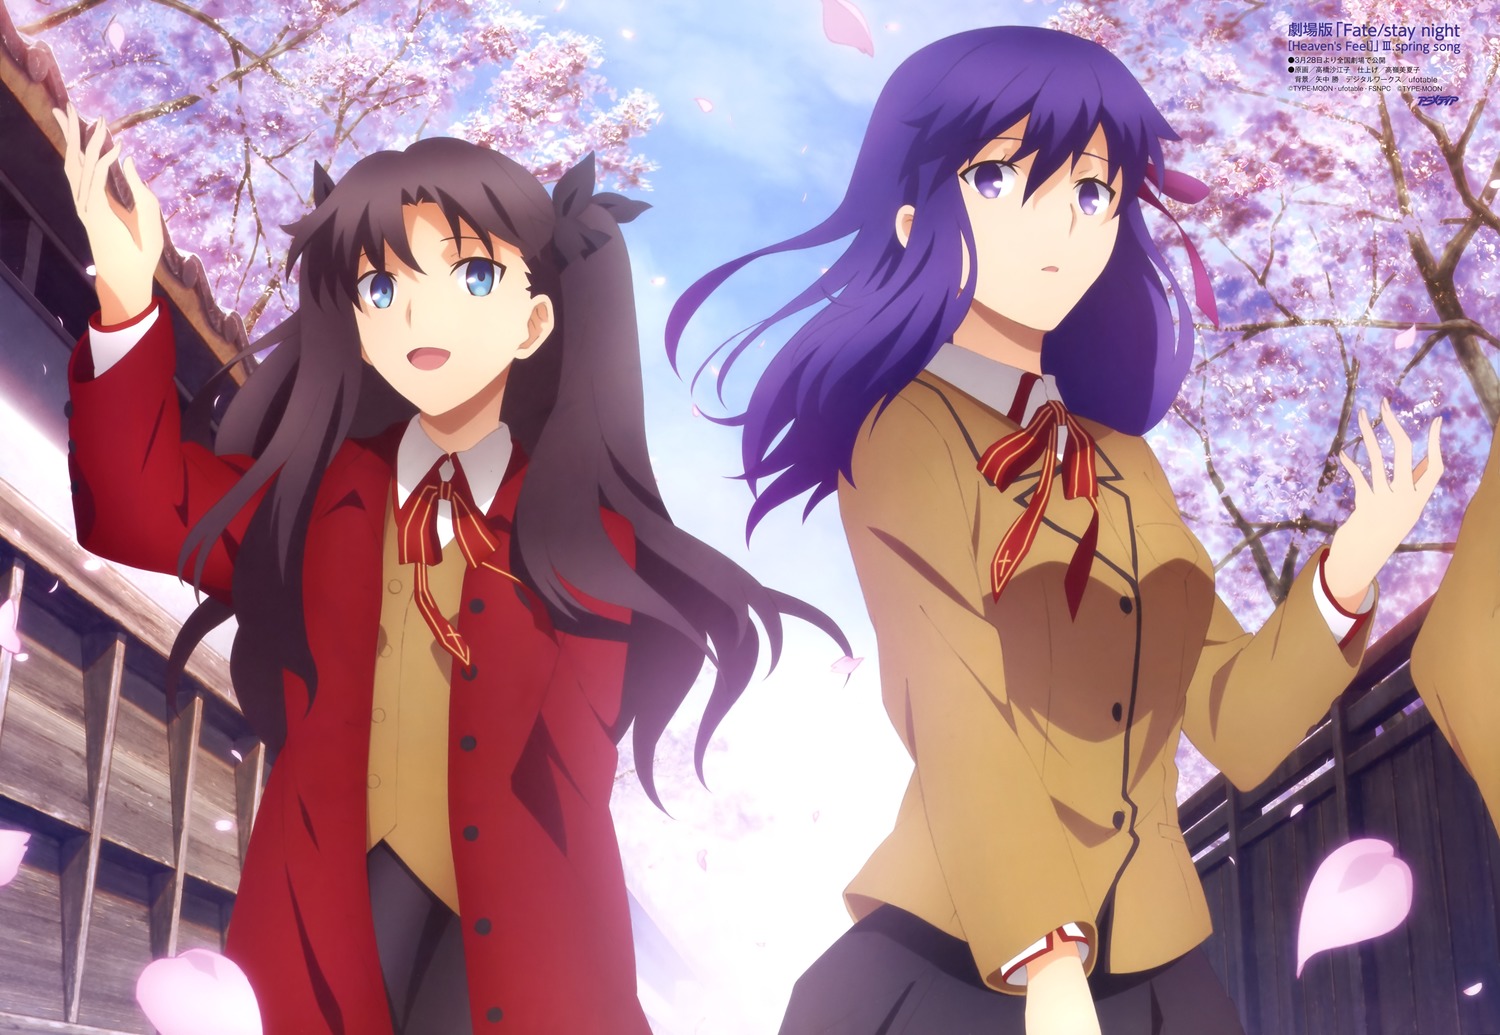 fate/stay night movie heaven's feel - iii. spring song download